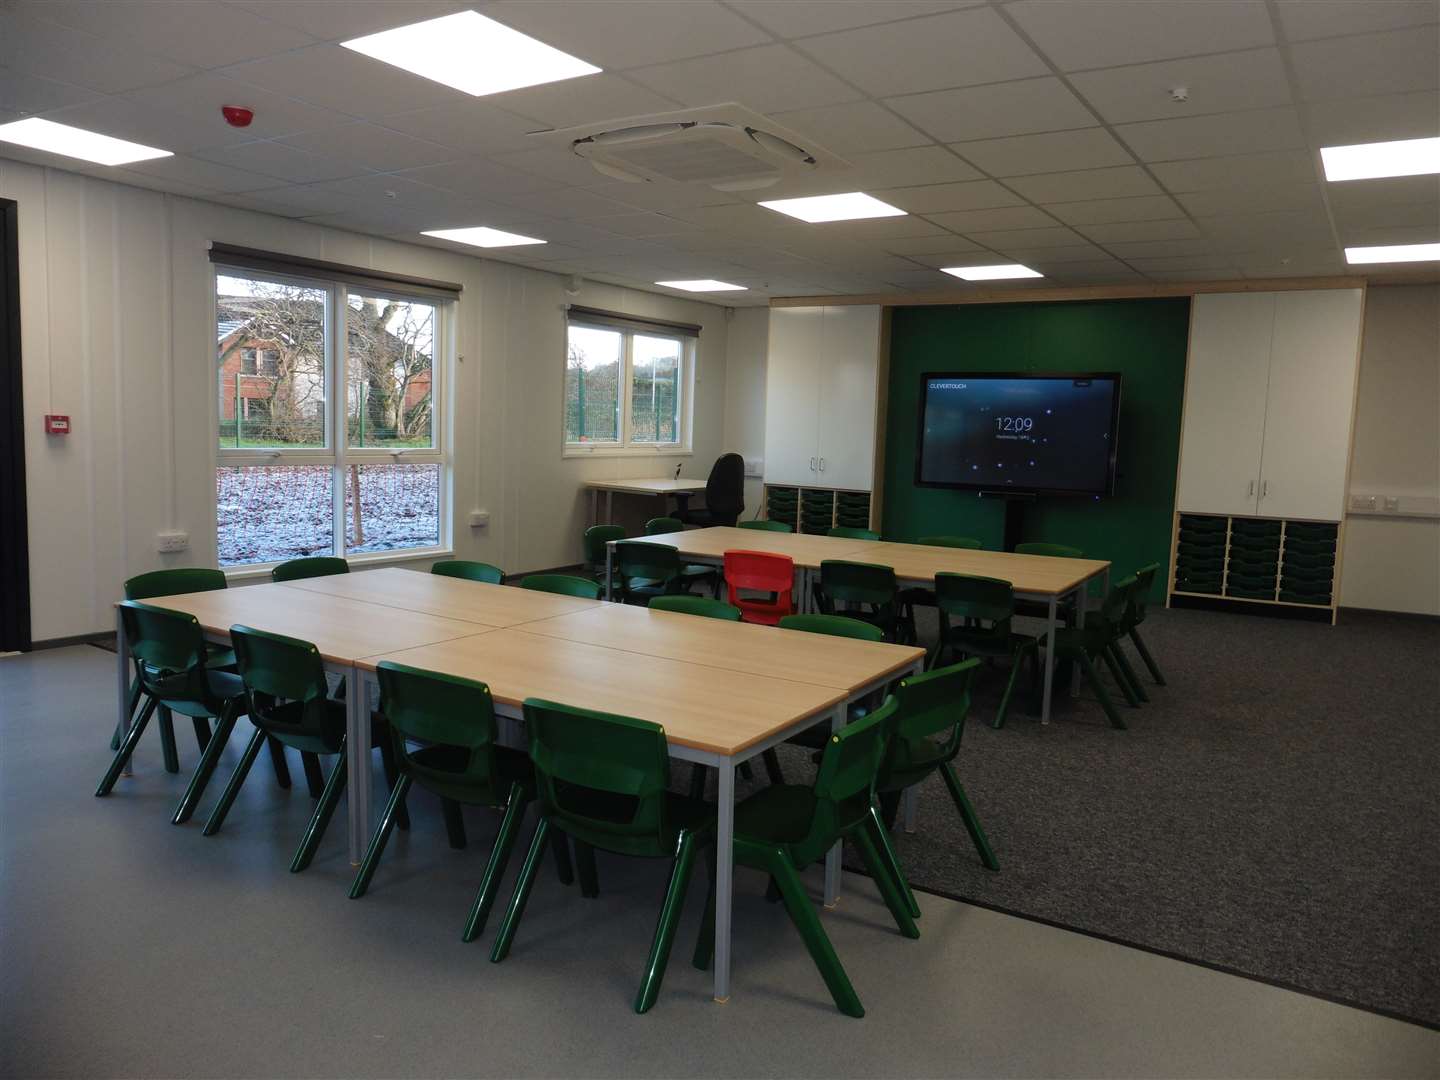 The new annexe will allow for greater primary students capacity.